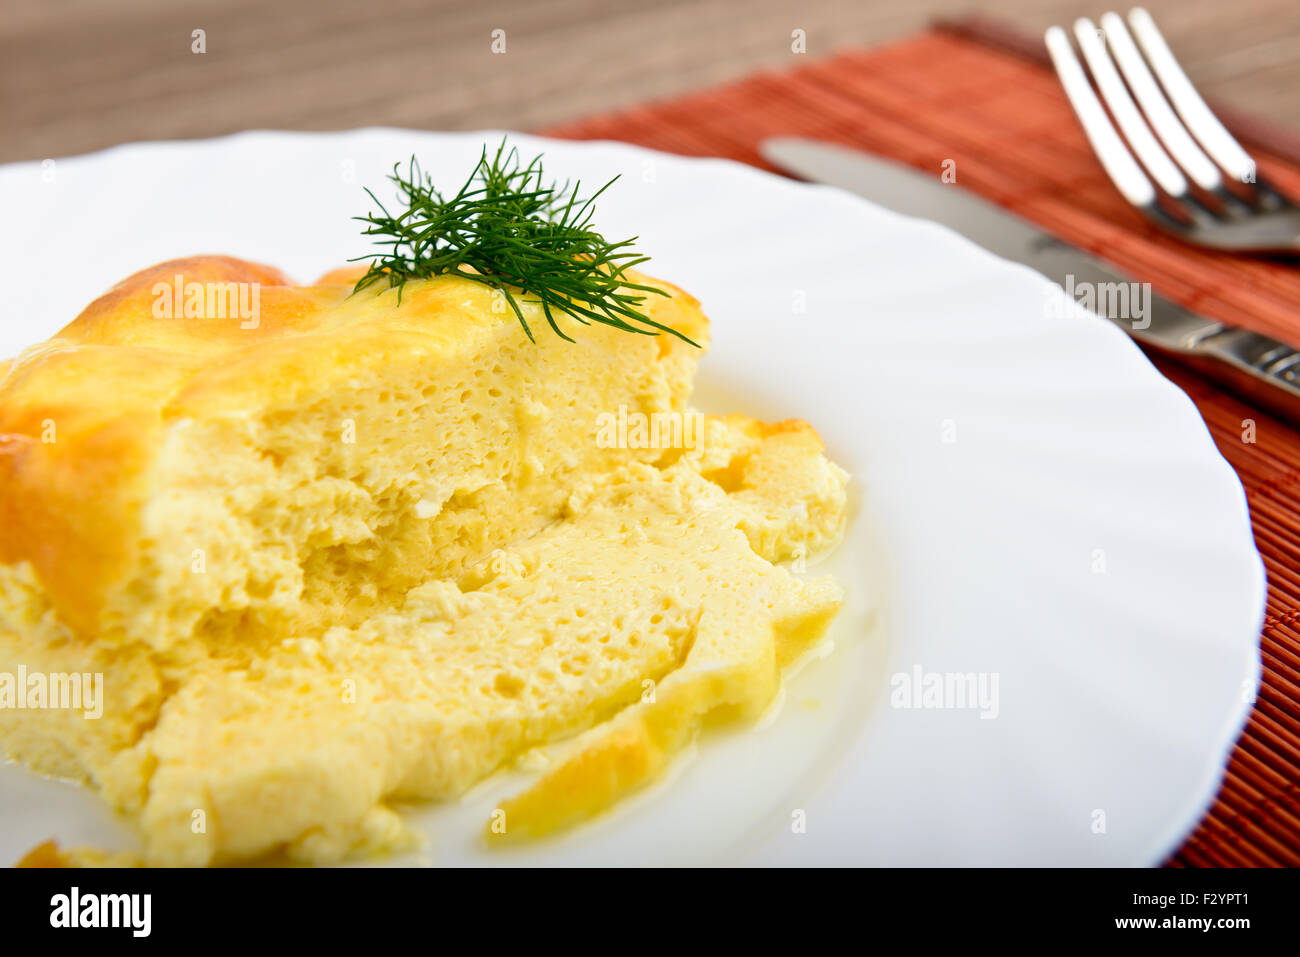 Asian food, scallop omelet Stock Photo